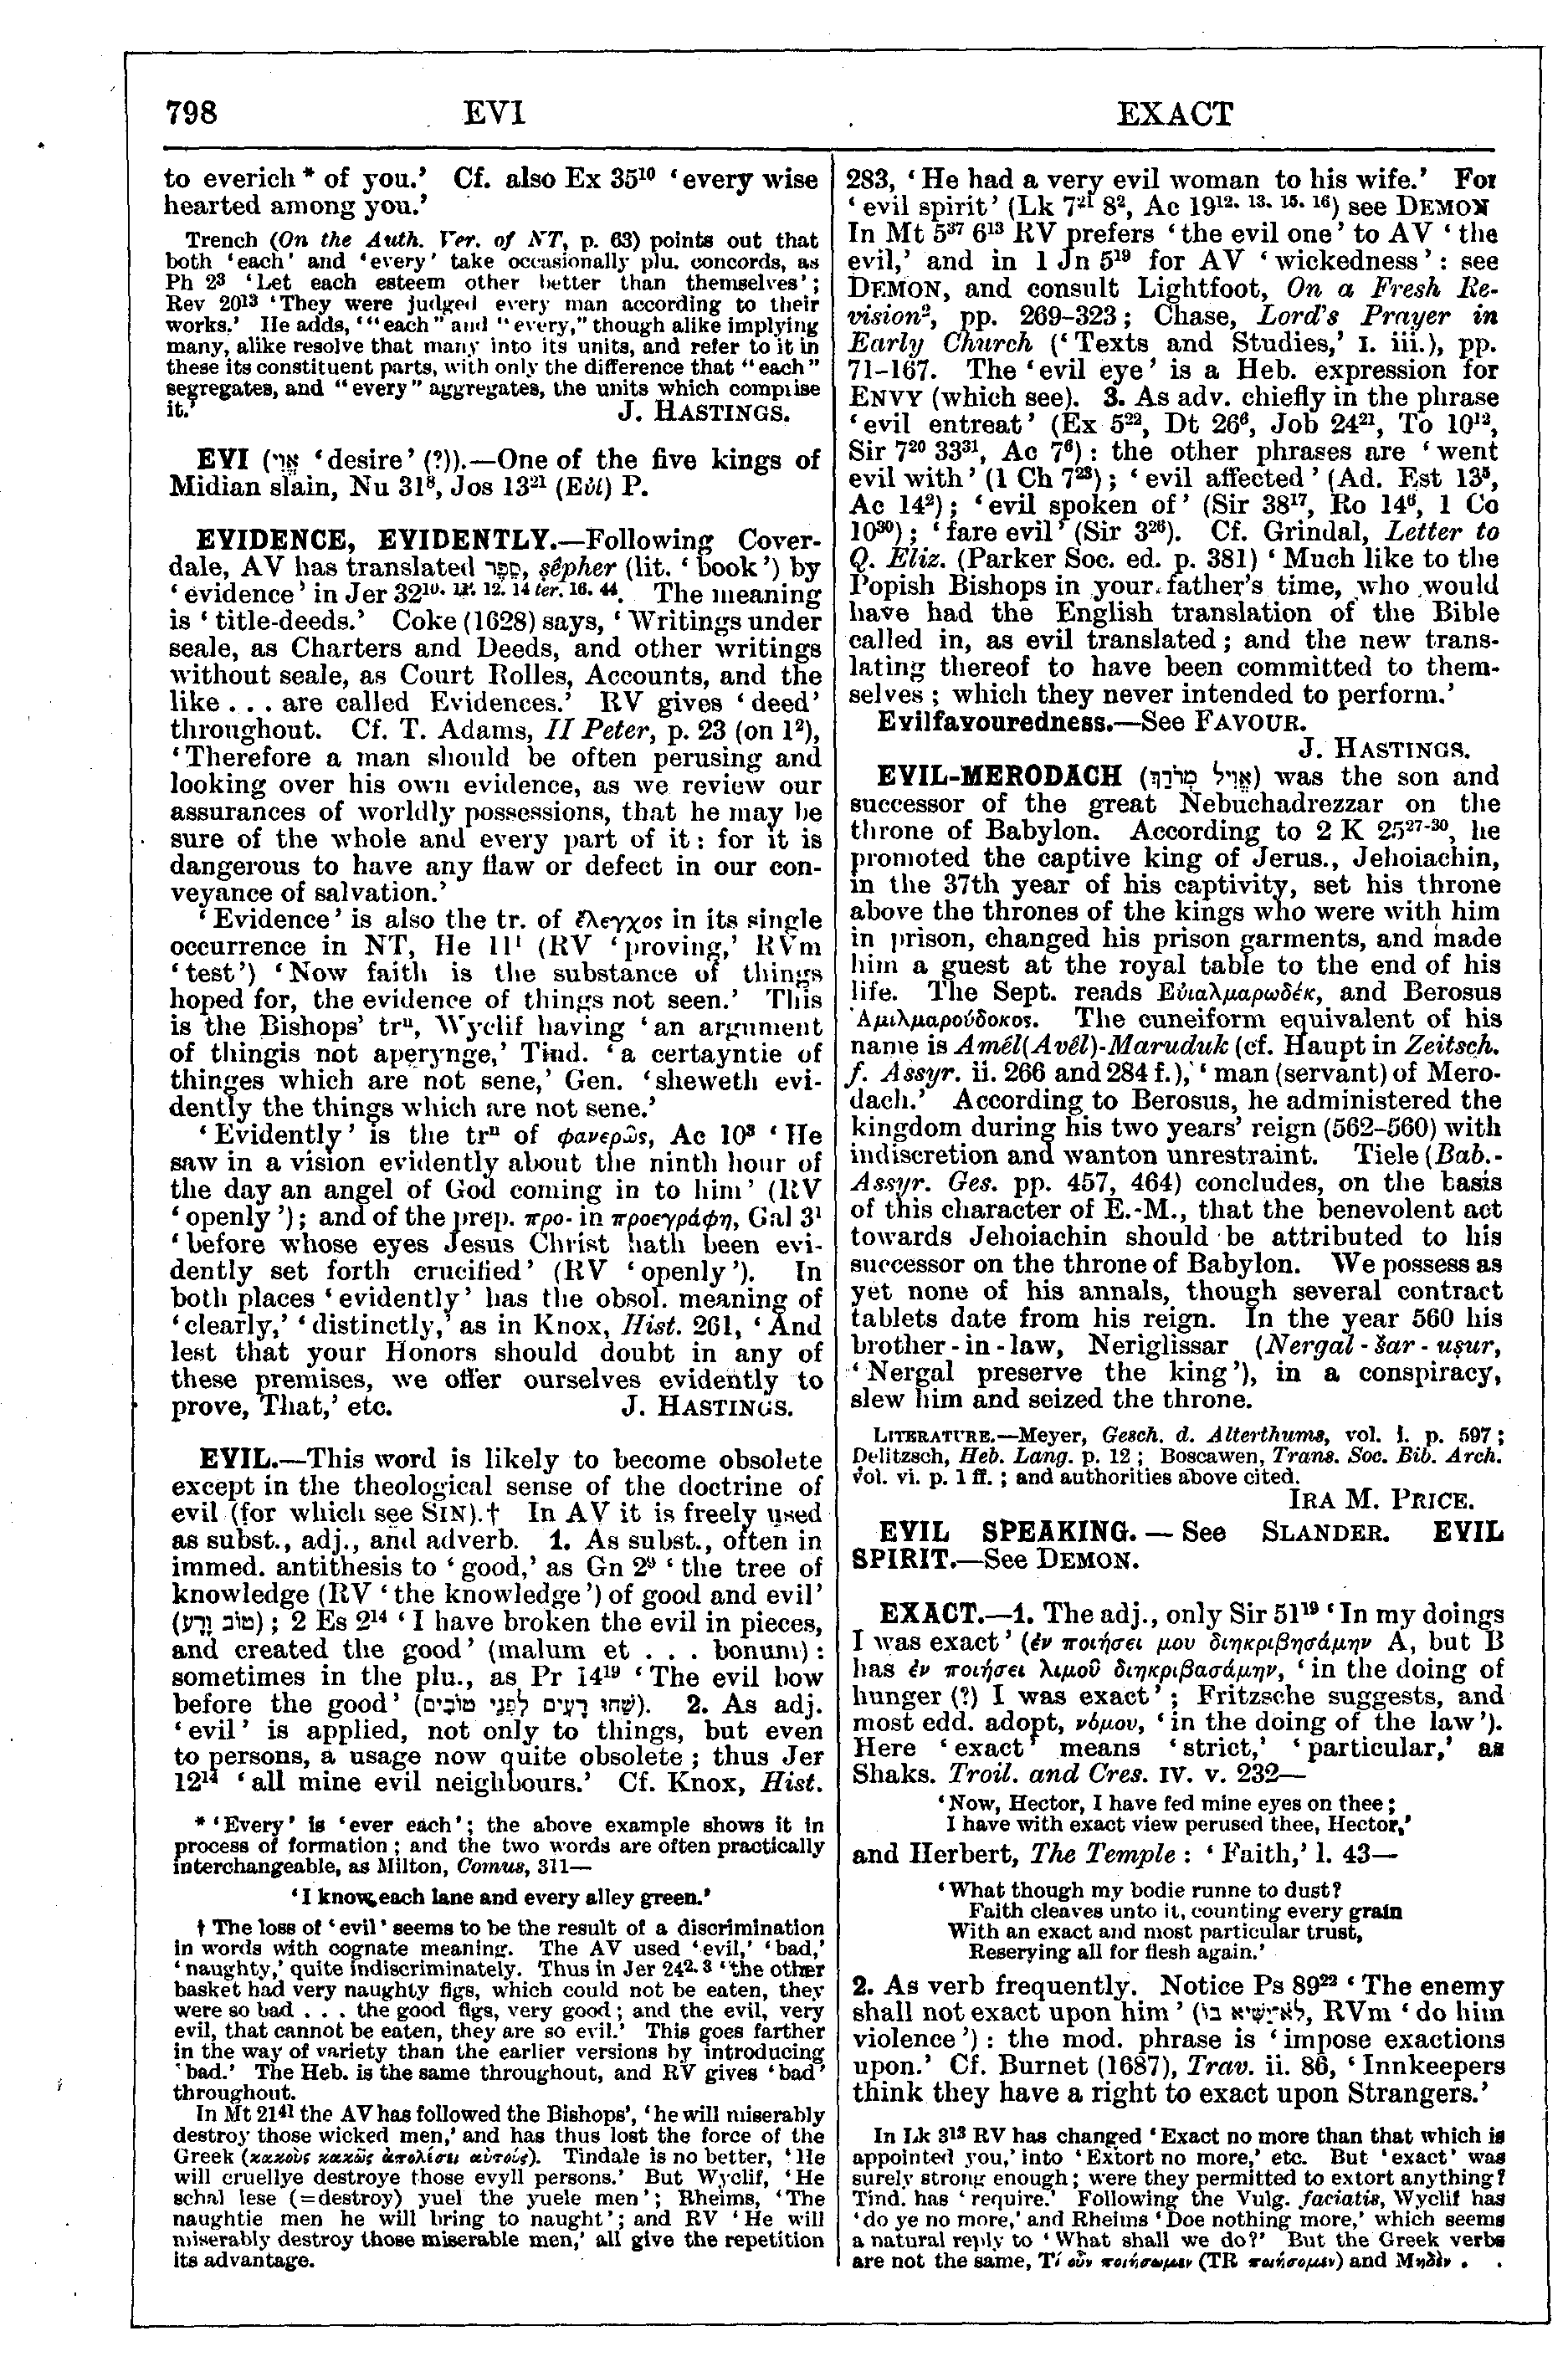 Image of page 798